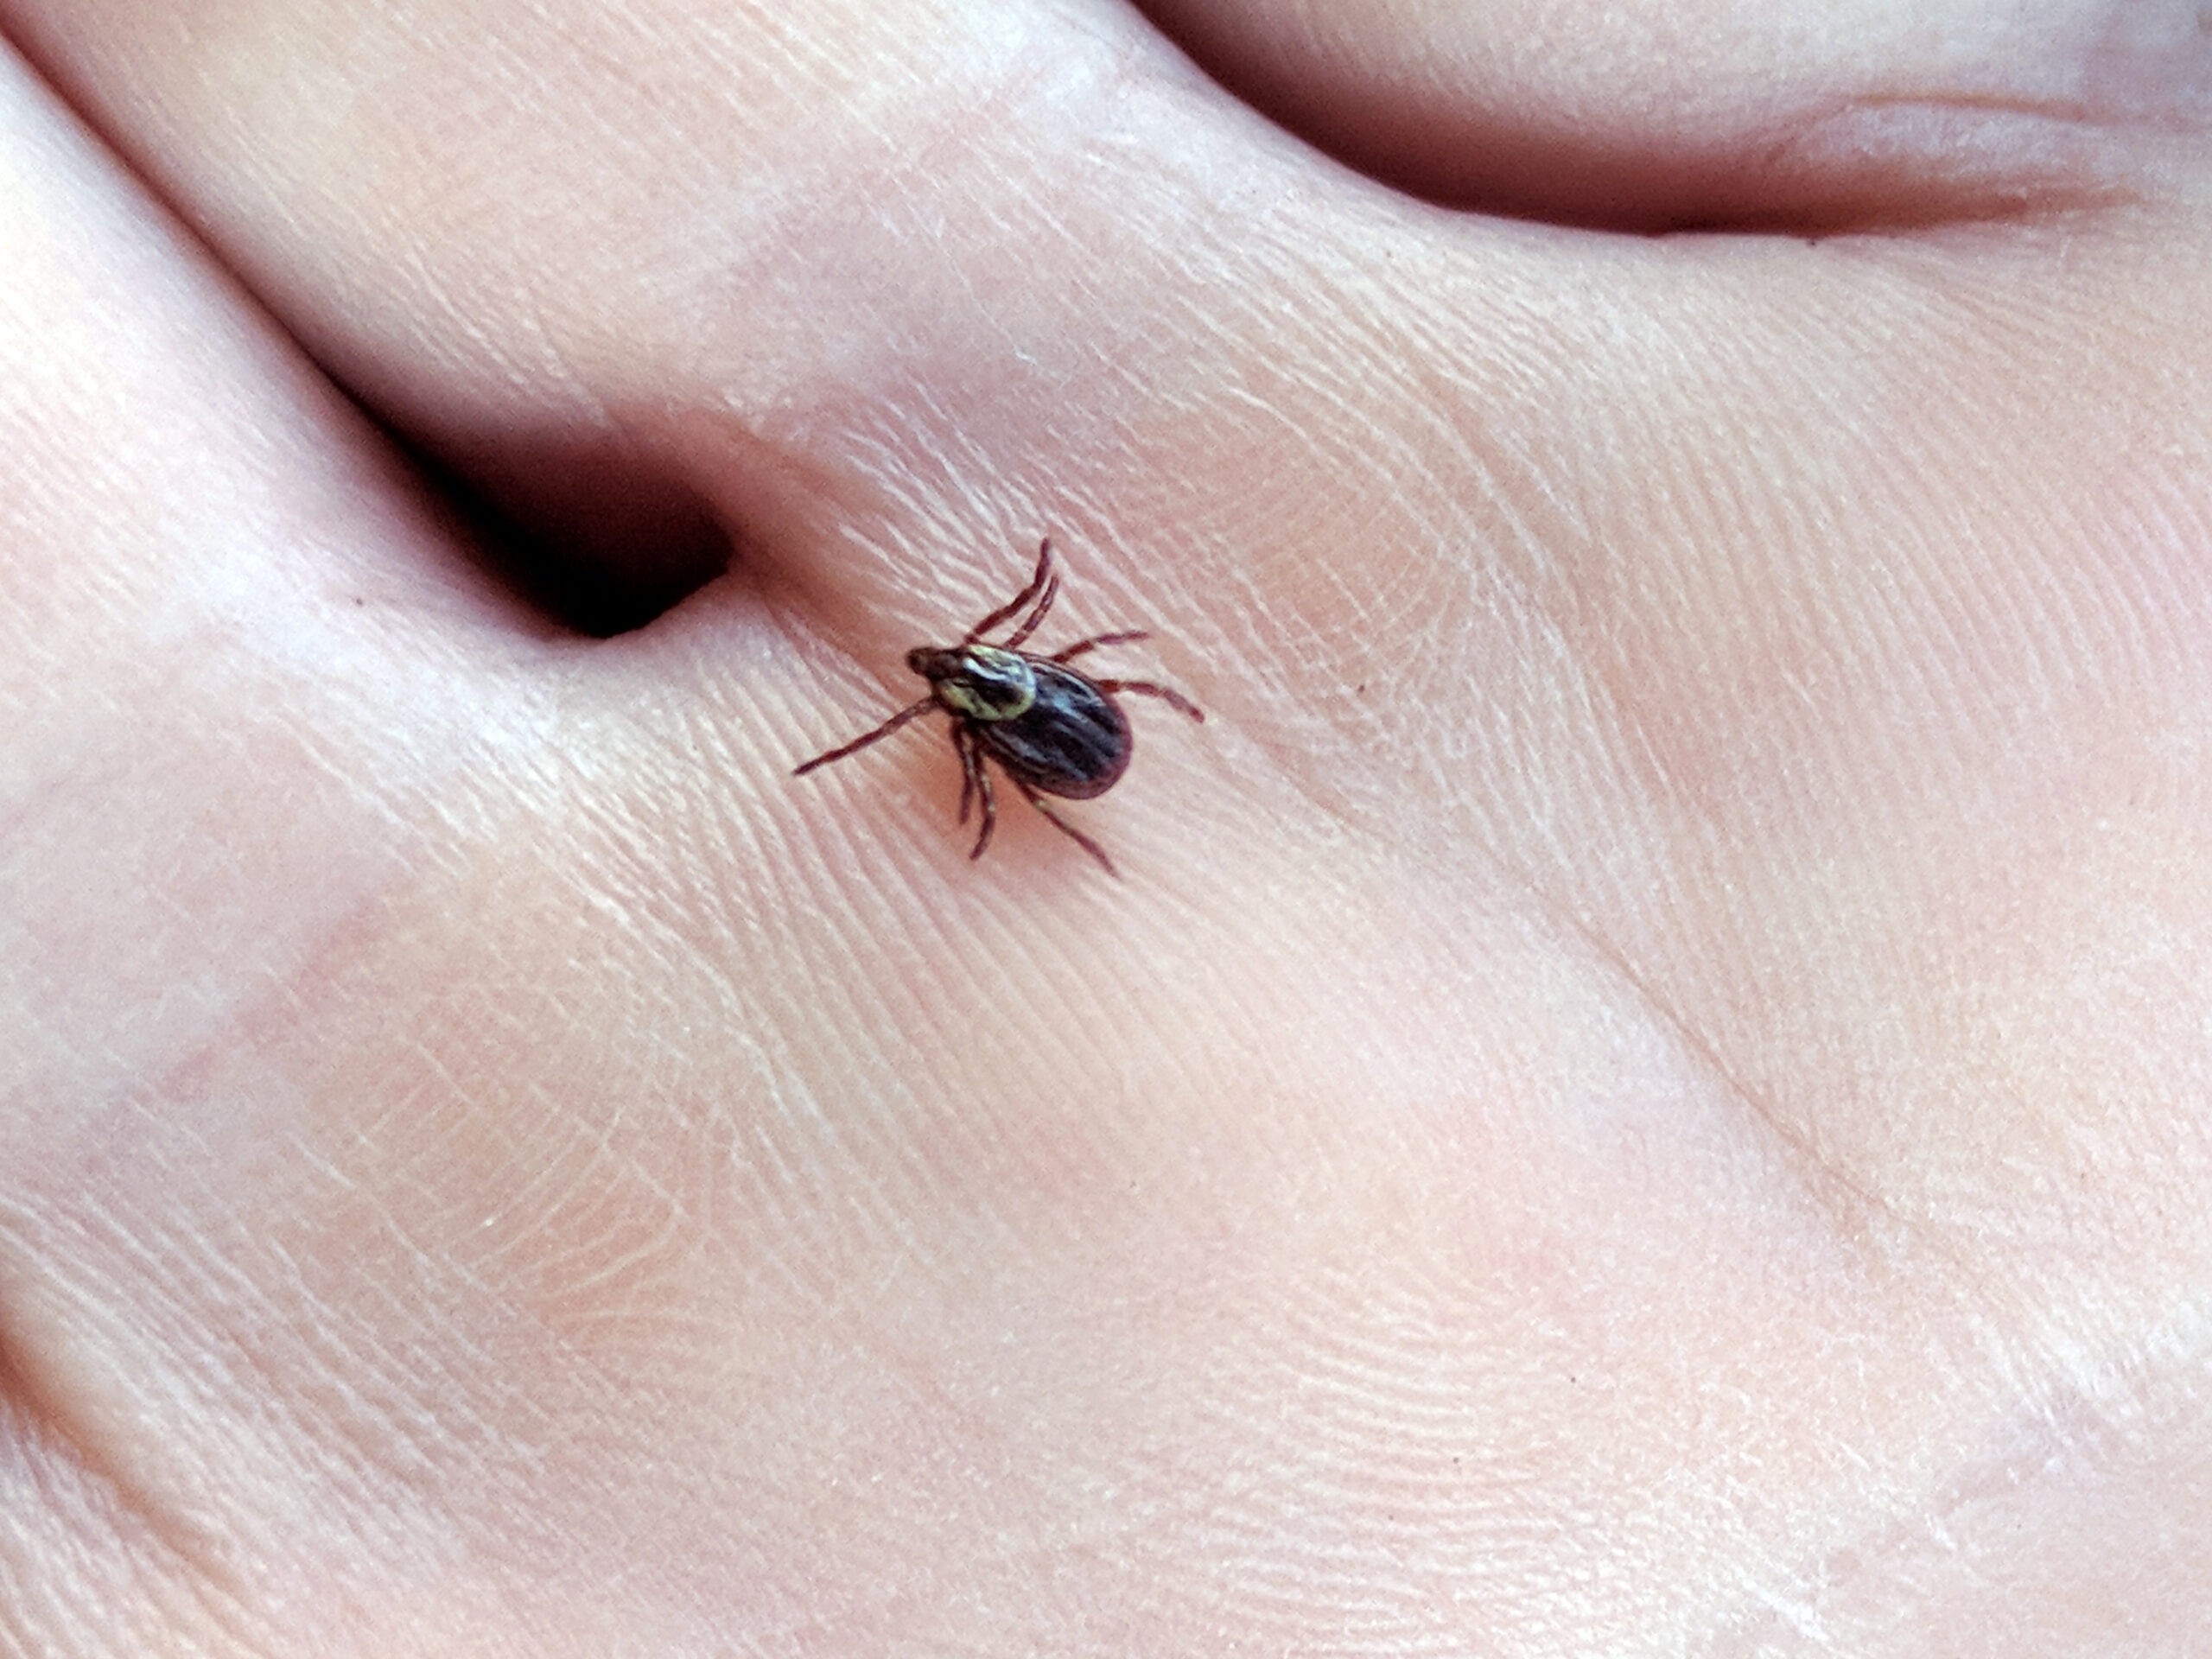 An American dog tick can carry diseases to hunters.